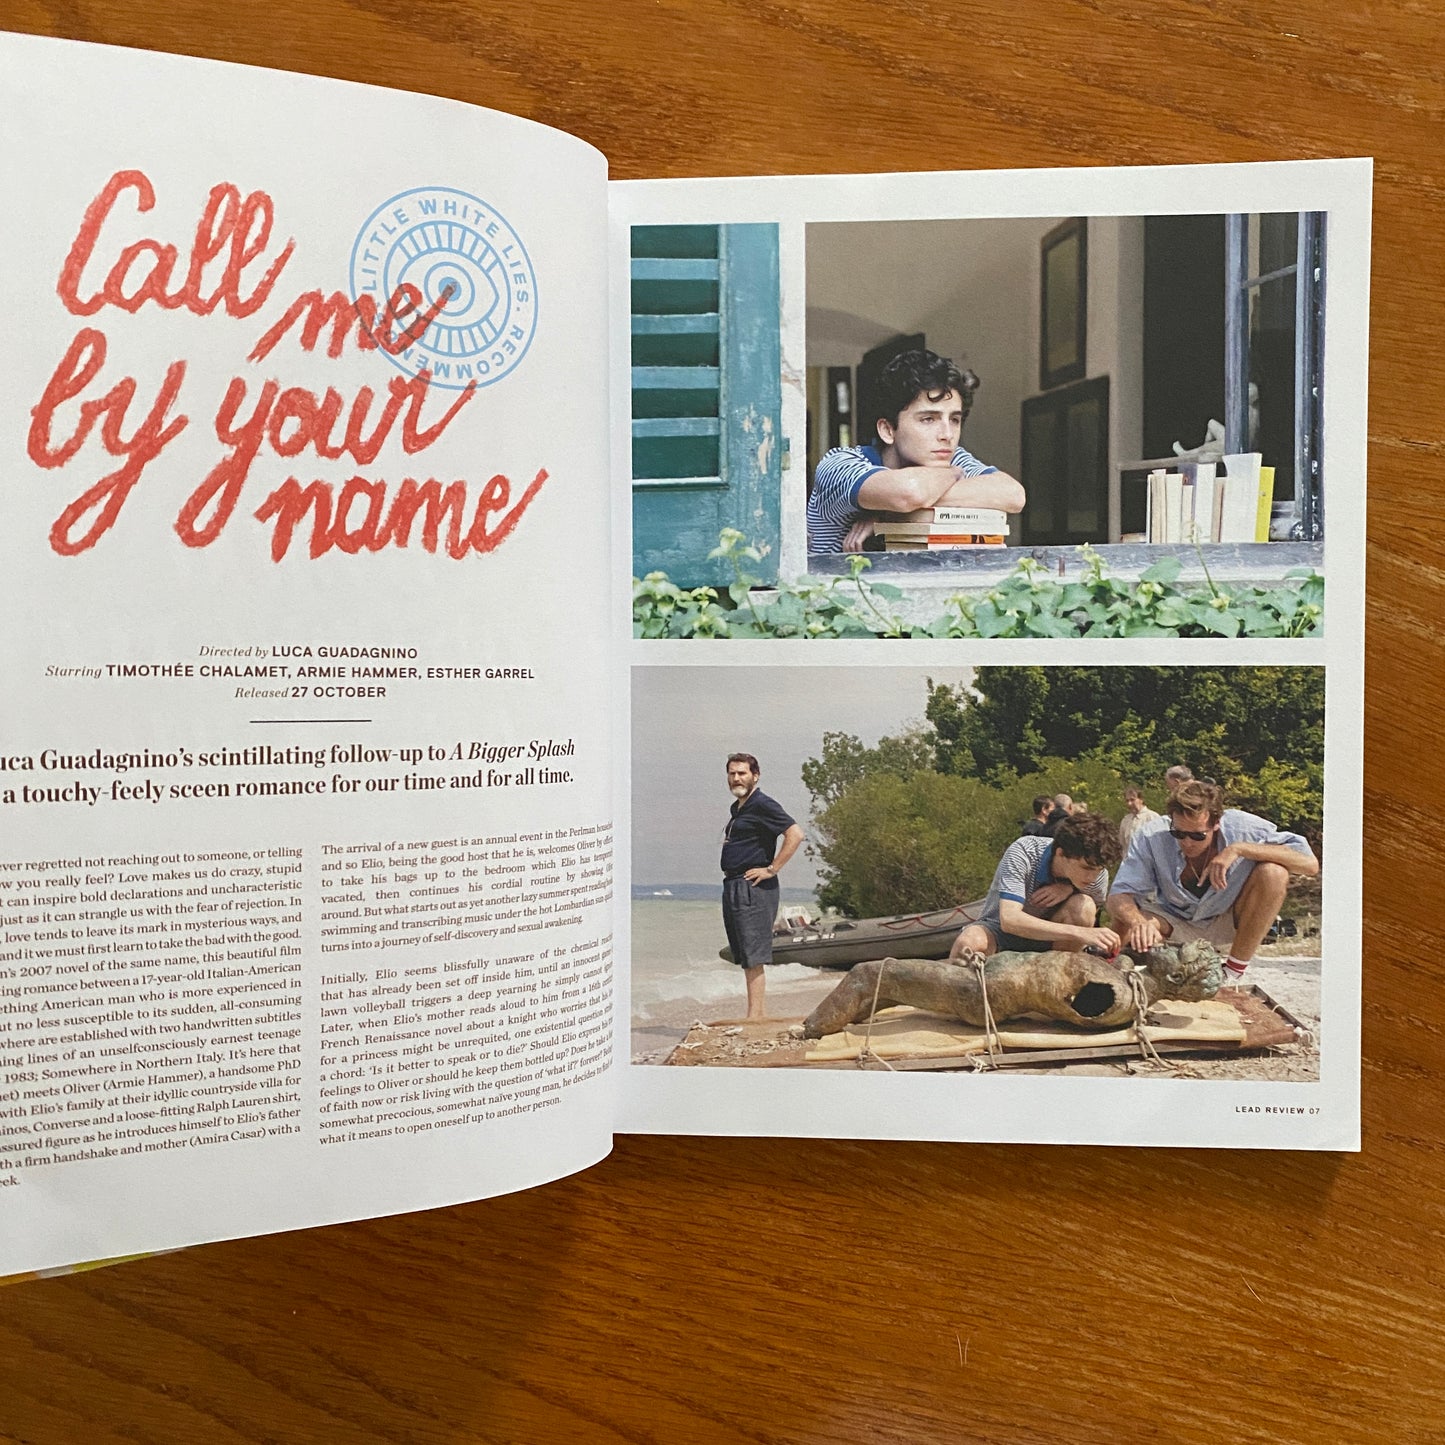 Issue 71 - Call Me by Your Name